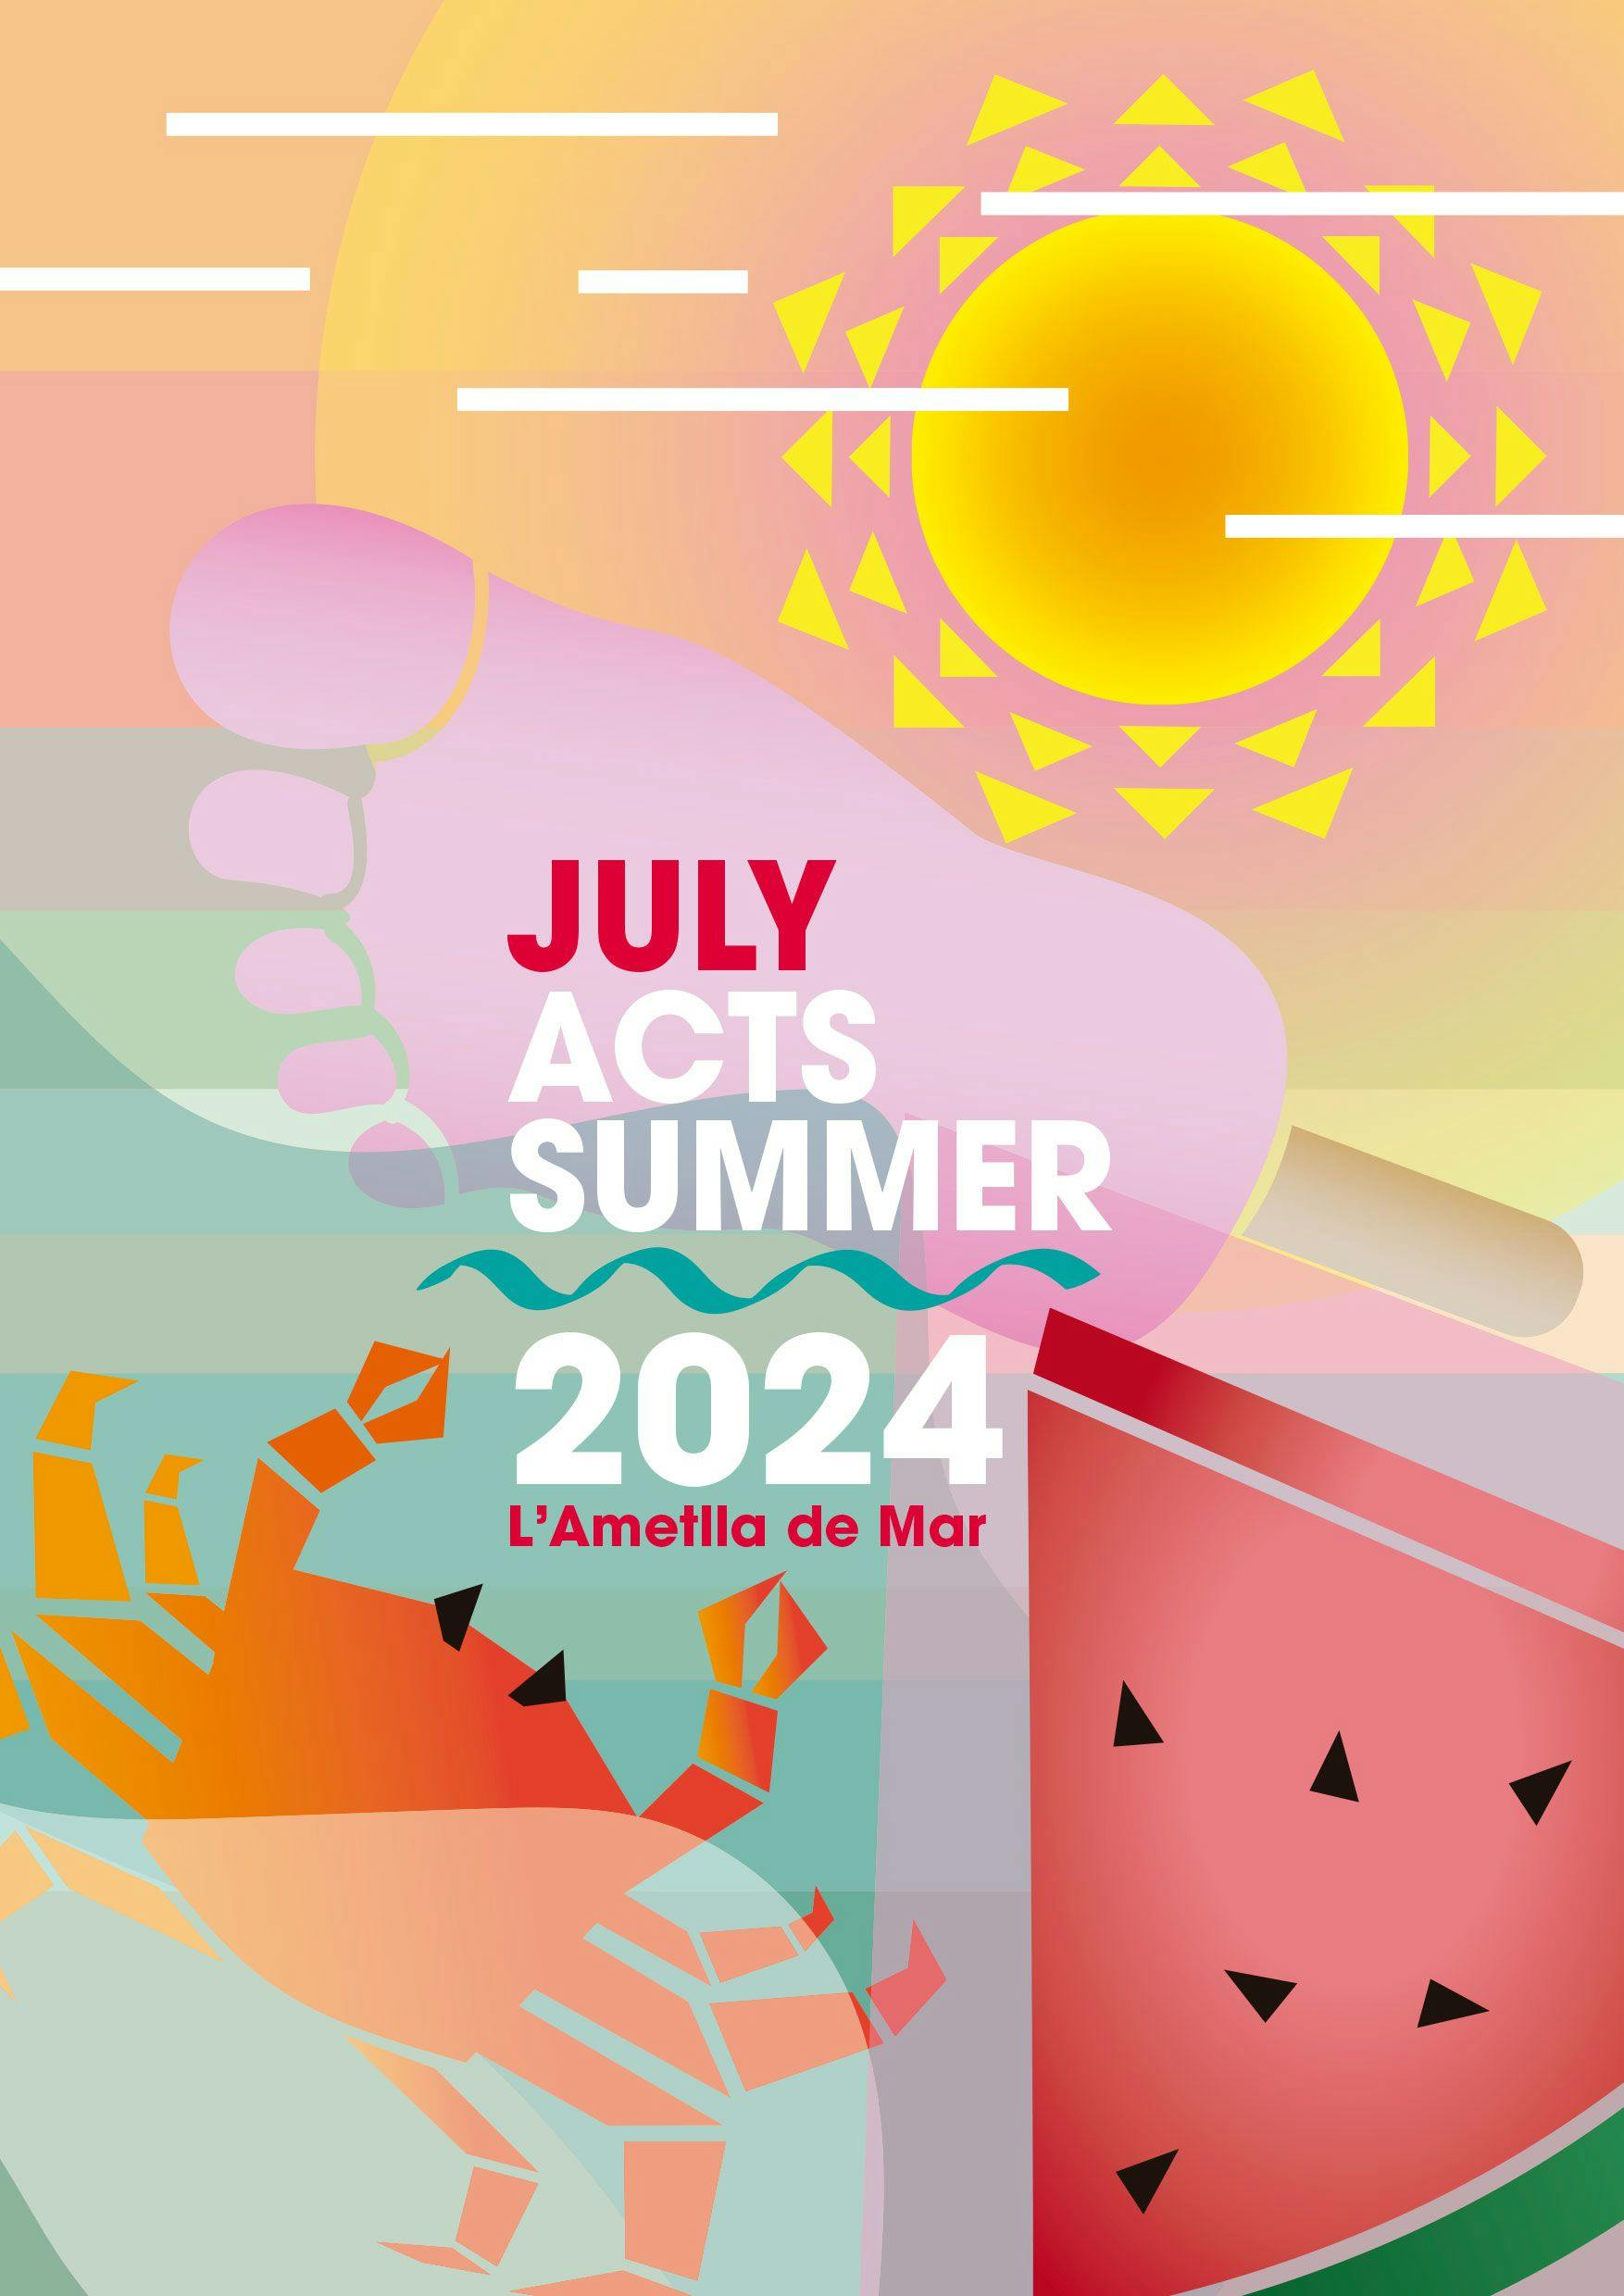 July Acts Summer 2024